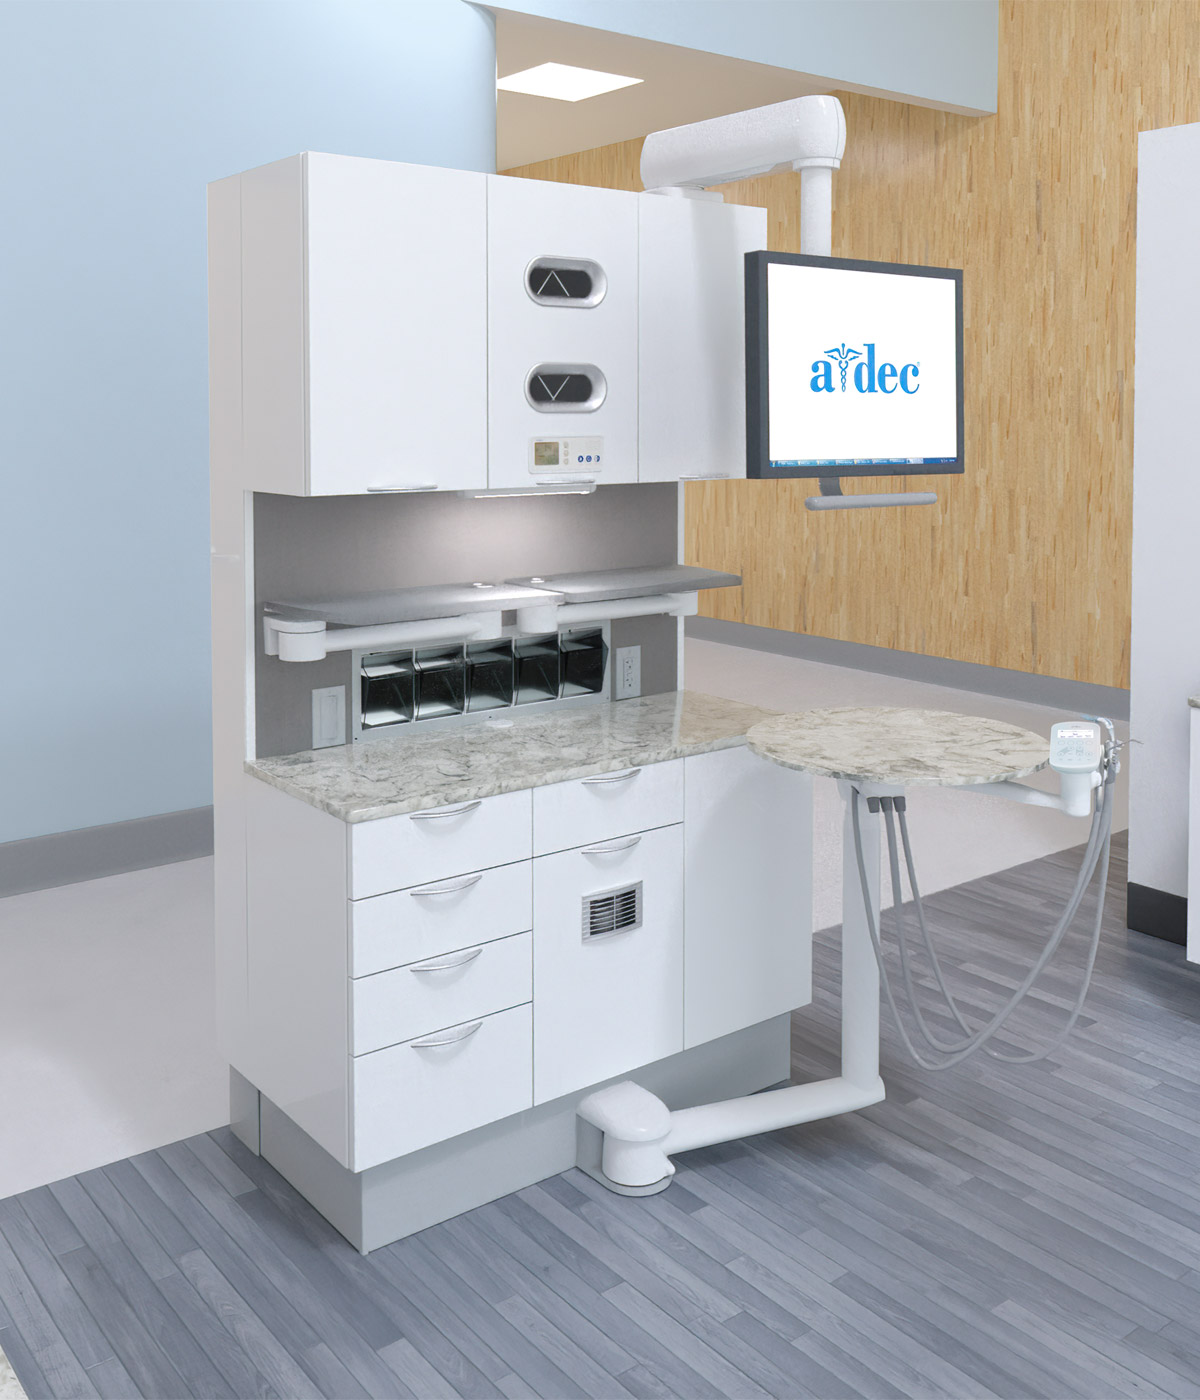 A-dec Inspire 391 dental cabinet in a dentist office